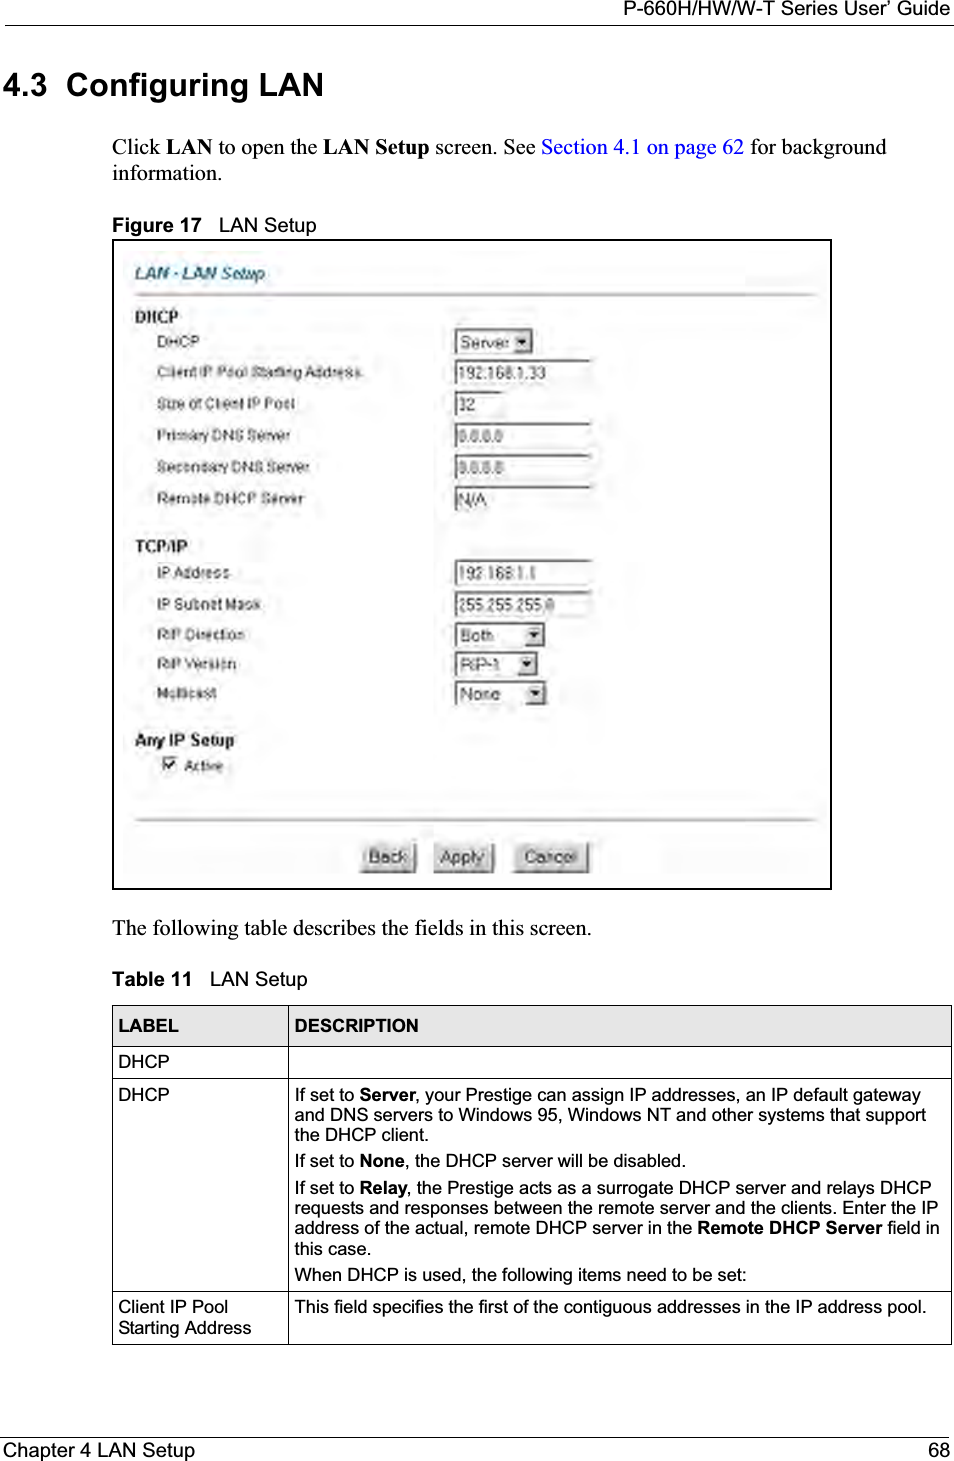 P-660H/HW/W-T Series User’ GuideChapter 4 LAN Setup 684.3  Configuring LAN Click LAN to open the LAN Setup screen. See Section 4.1 on page 62 for background information.Figure 17   LAN SetupThe following table describes the fields in this screen.  Table 11   LAN SetupLABEL DESCRIPTIONDHCPDHCP If set to Server, your Prestige can assign IP addresses, an IP default gateway and DNS servers to Windows 95, Windows NT and other systems that support the DHCP client.If set to None, the DHCP server will be disabled. If set to Relay, the Prestige acts as a surrogate DHCP server and relays DHCP requests and responses between the remote server and the clients. Enter the IP address of the actual, remote DHCP server in the Remote DHCP Server field in this case. When DHCP is used, the following items need to be set: Client IP Pool Starting AddressThis field specifies the first of the contiguous addresses in the IP address pool.